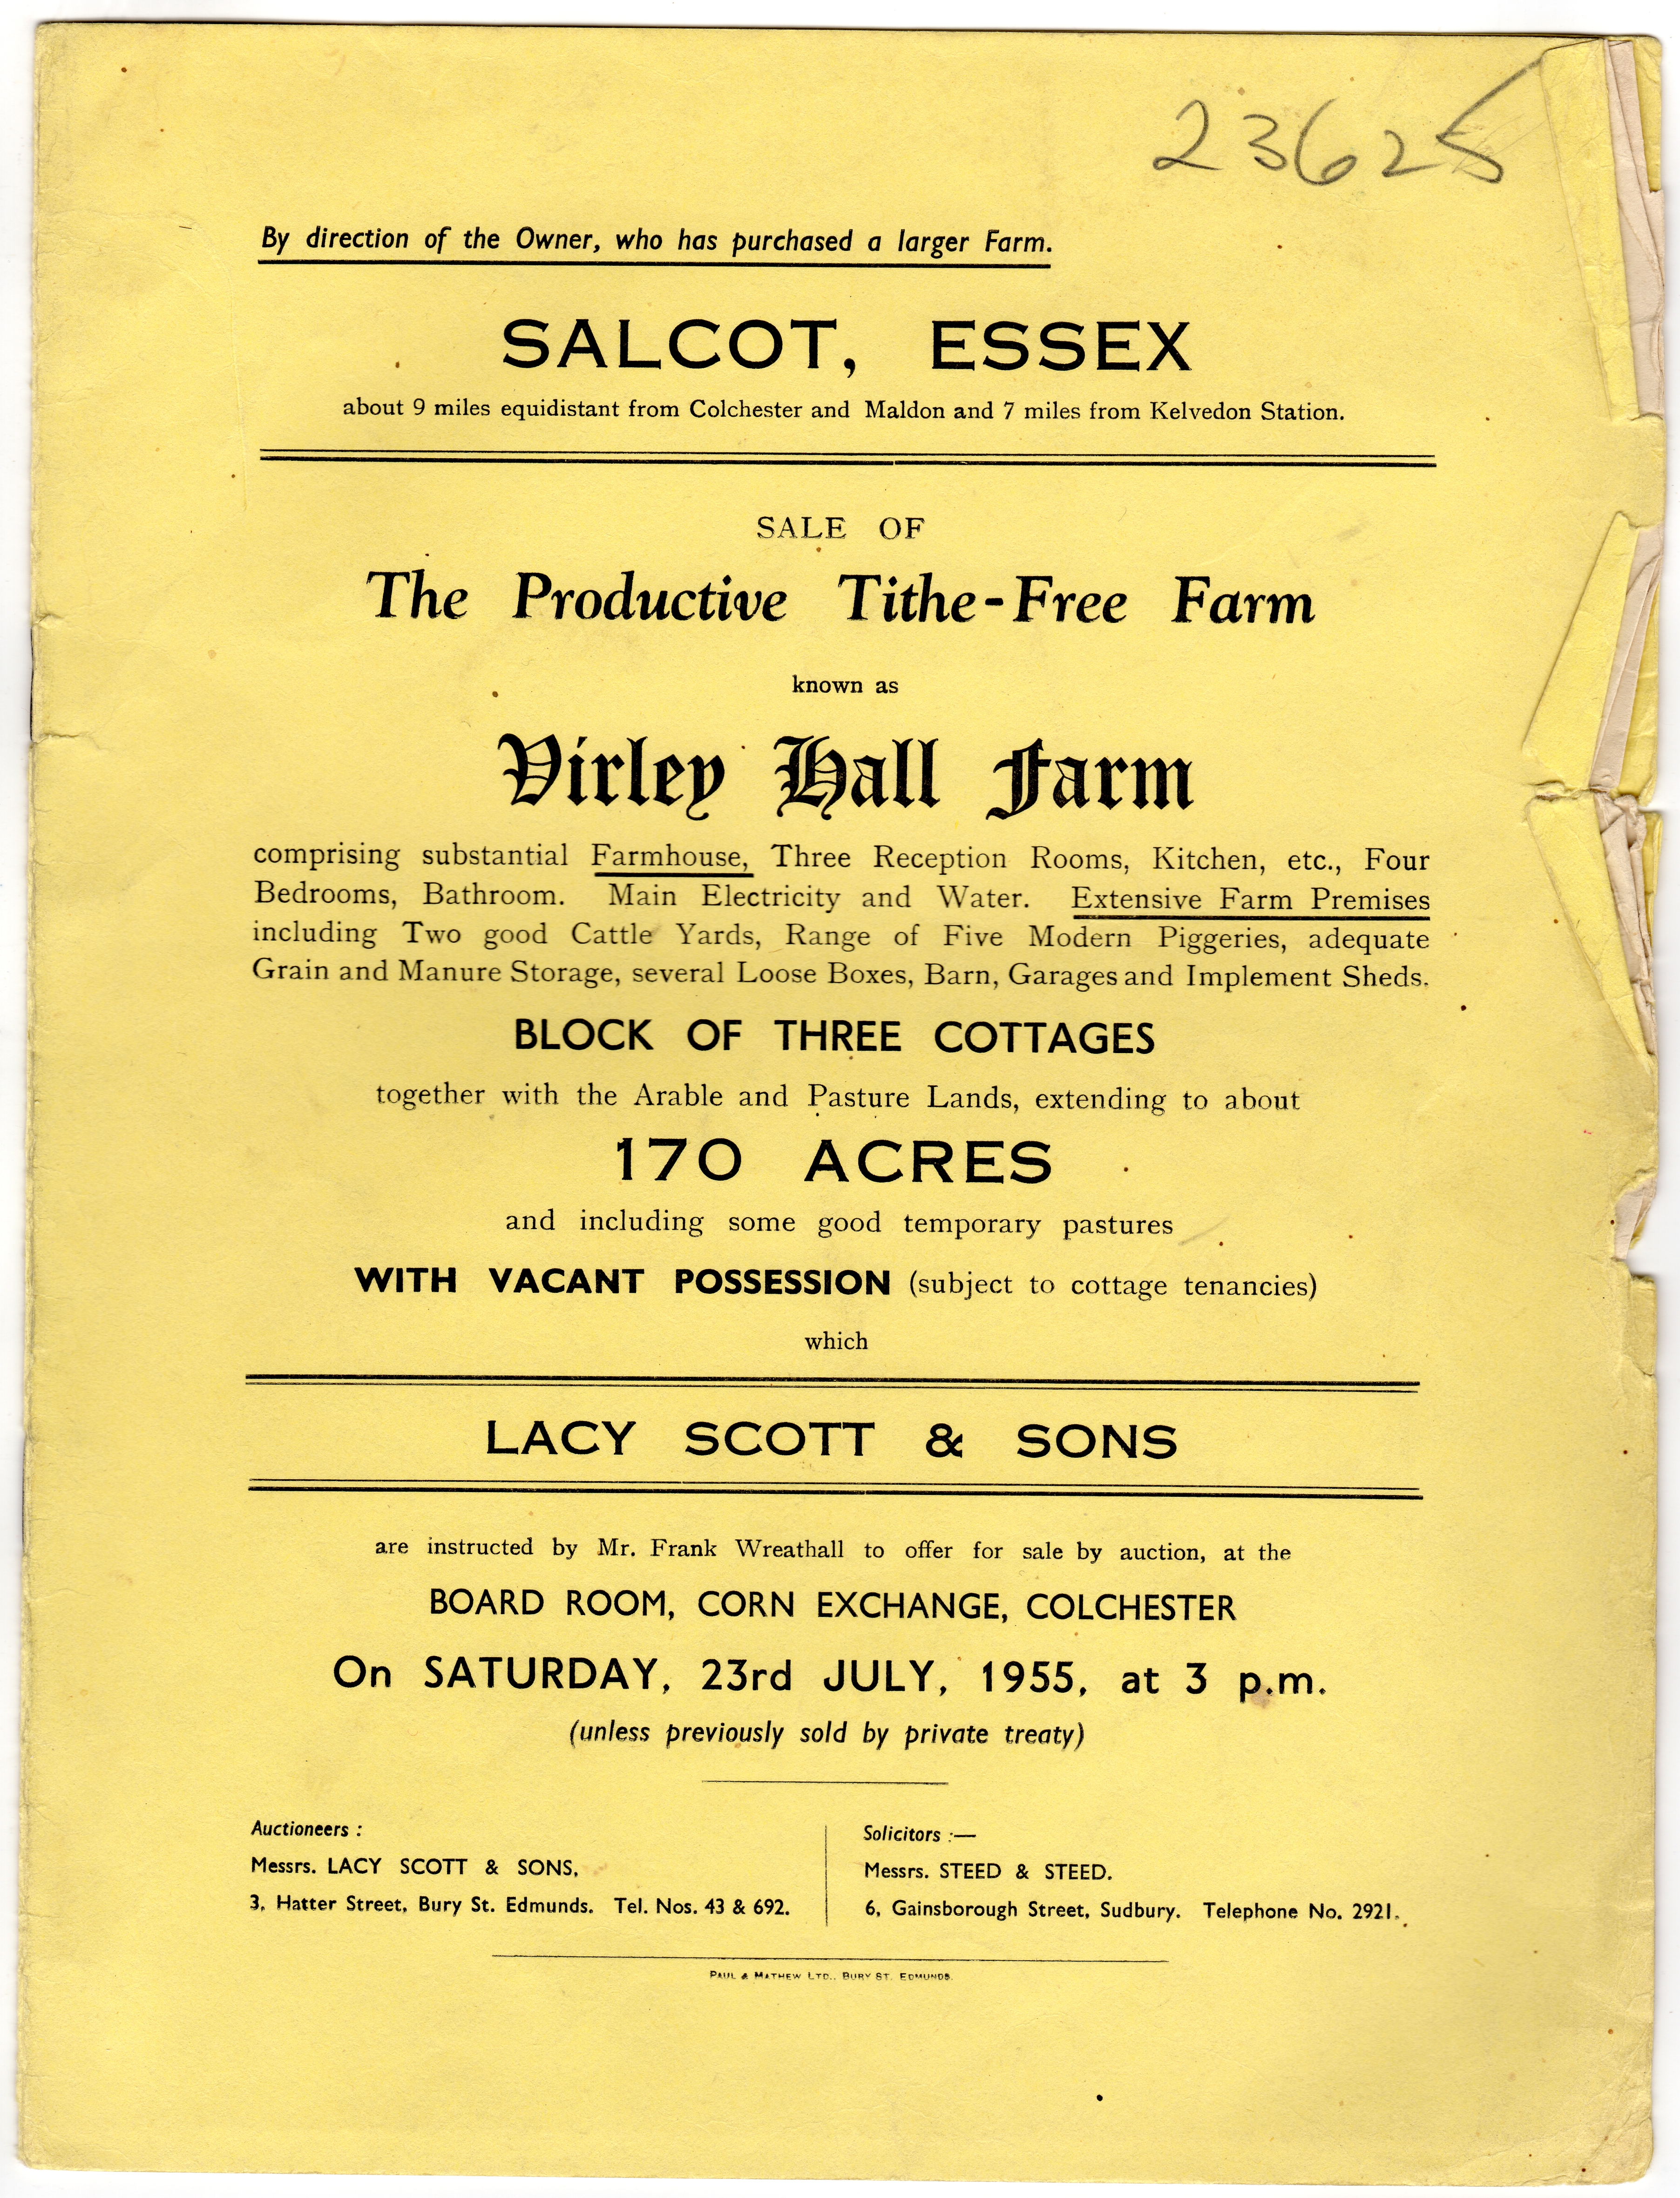 Click to Pause Slide Show


 Virley Hall Farm Sale, Salcot, Essex.

170 acres

Lacy Scott & Sons are instructed to offer for sale by auction by Mr Frank Wreathall. Corn Exchange, Colchester. 
Cat1 Places-->Salcott & Virley